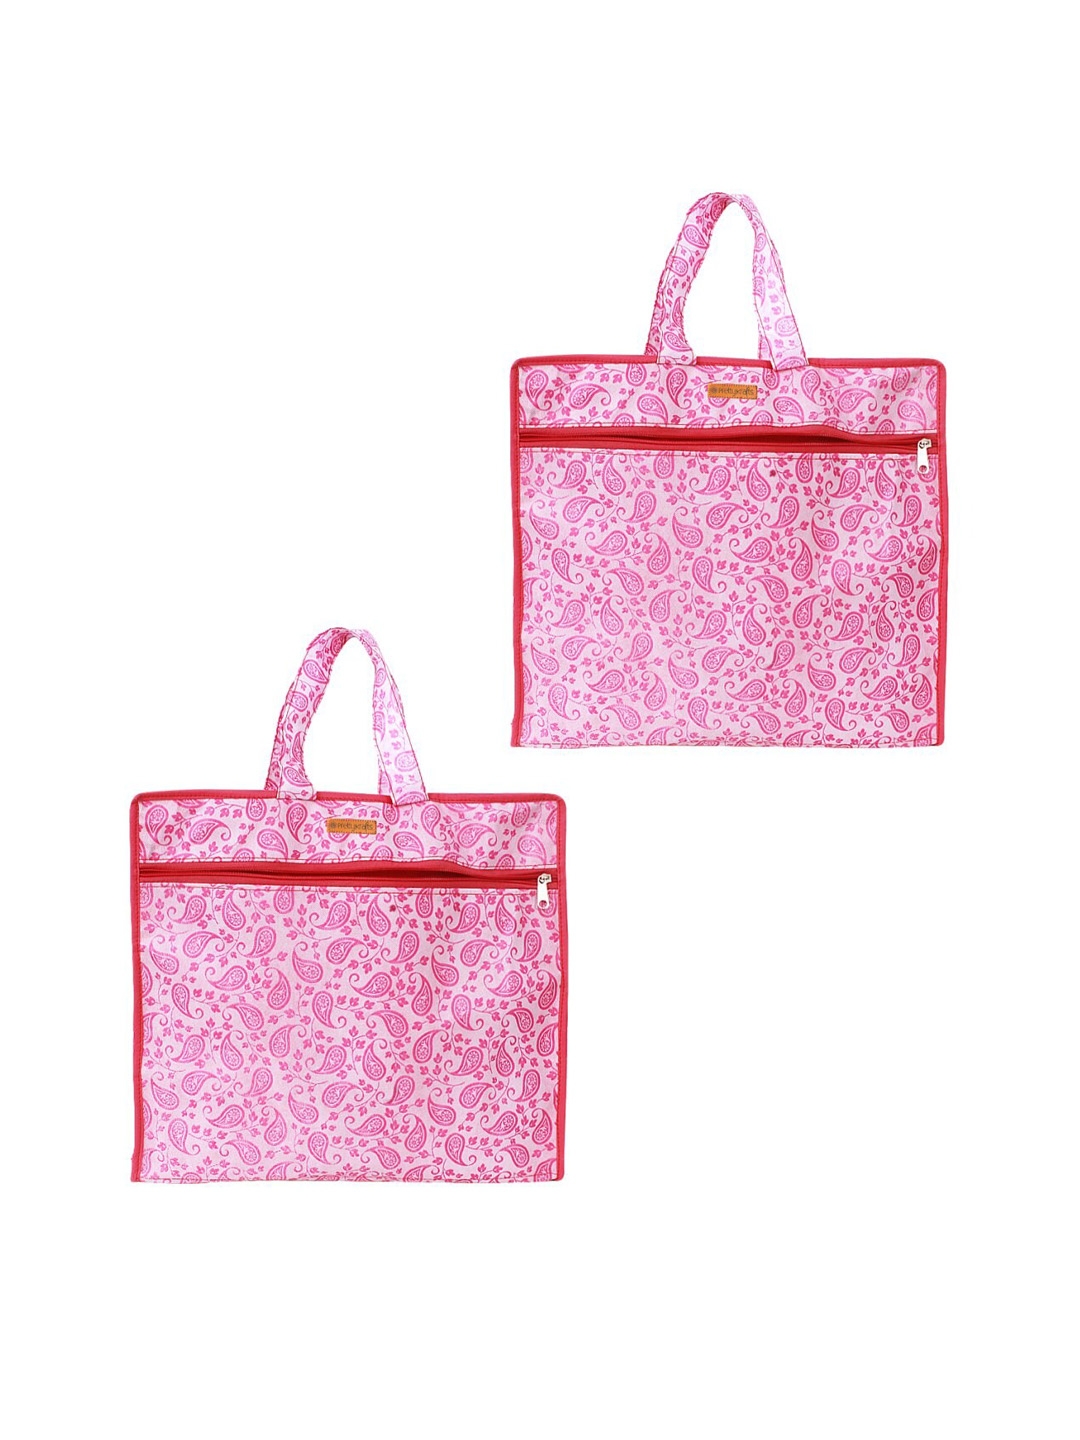 prettykrafts Women Set Of 2 Pink Printed Saree Covers